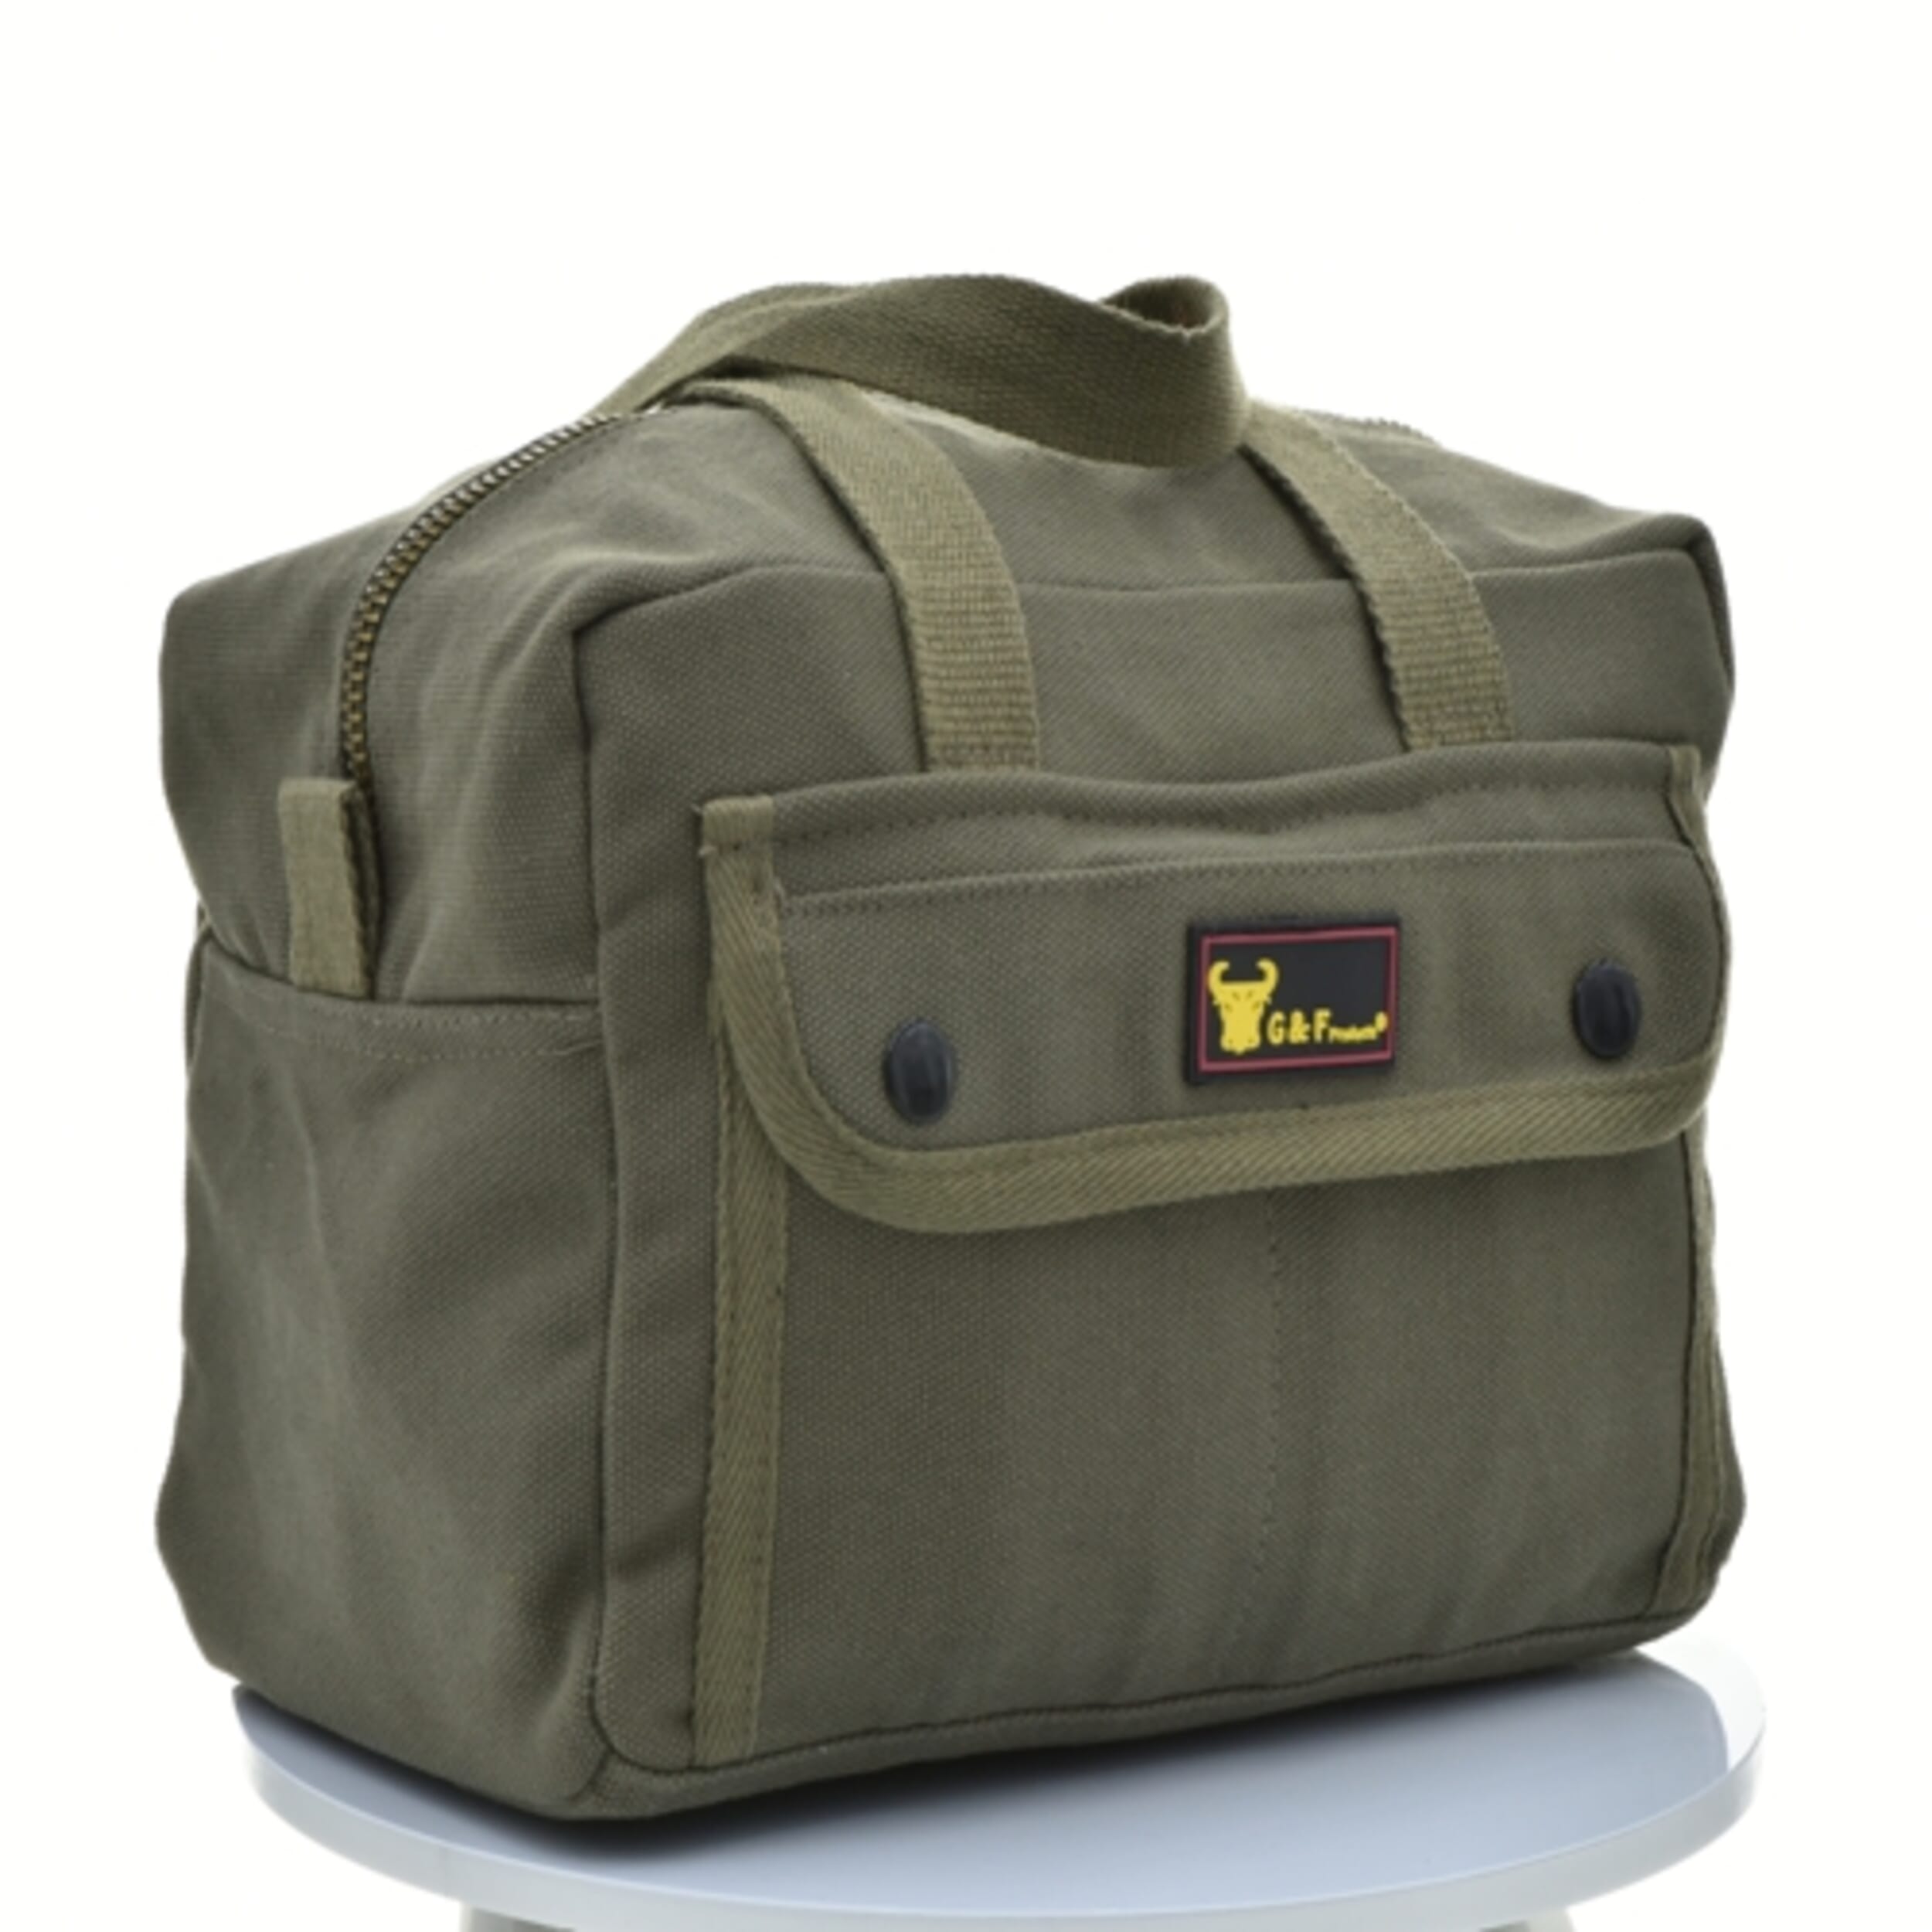 G & F Government Issued Style Mechanics Heavy Duty Tool bag with